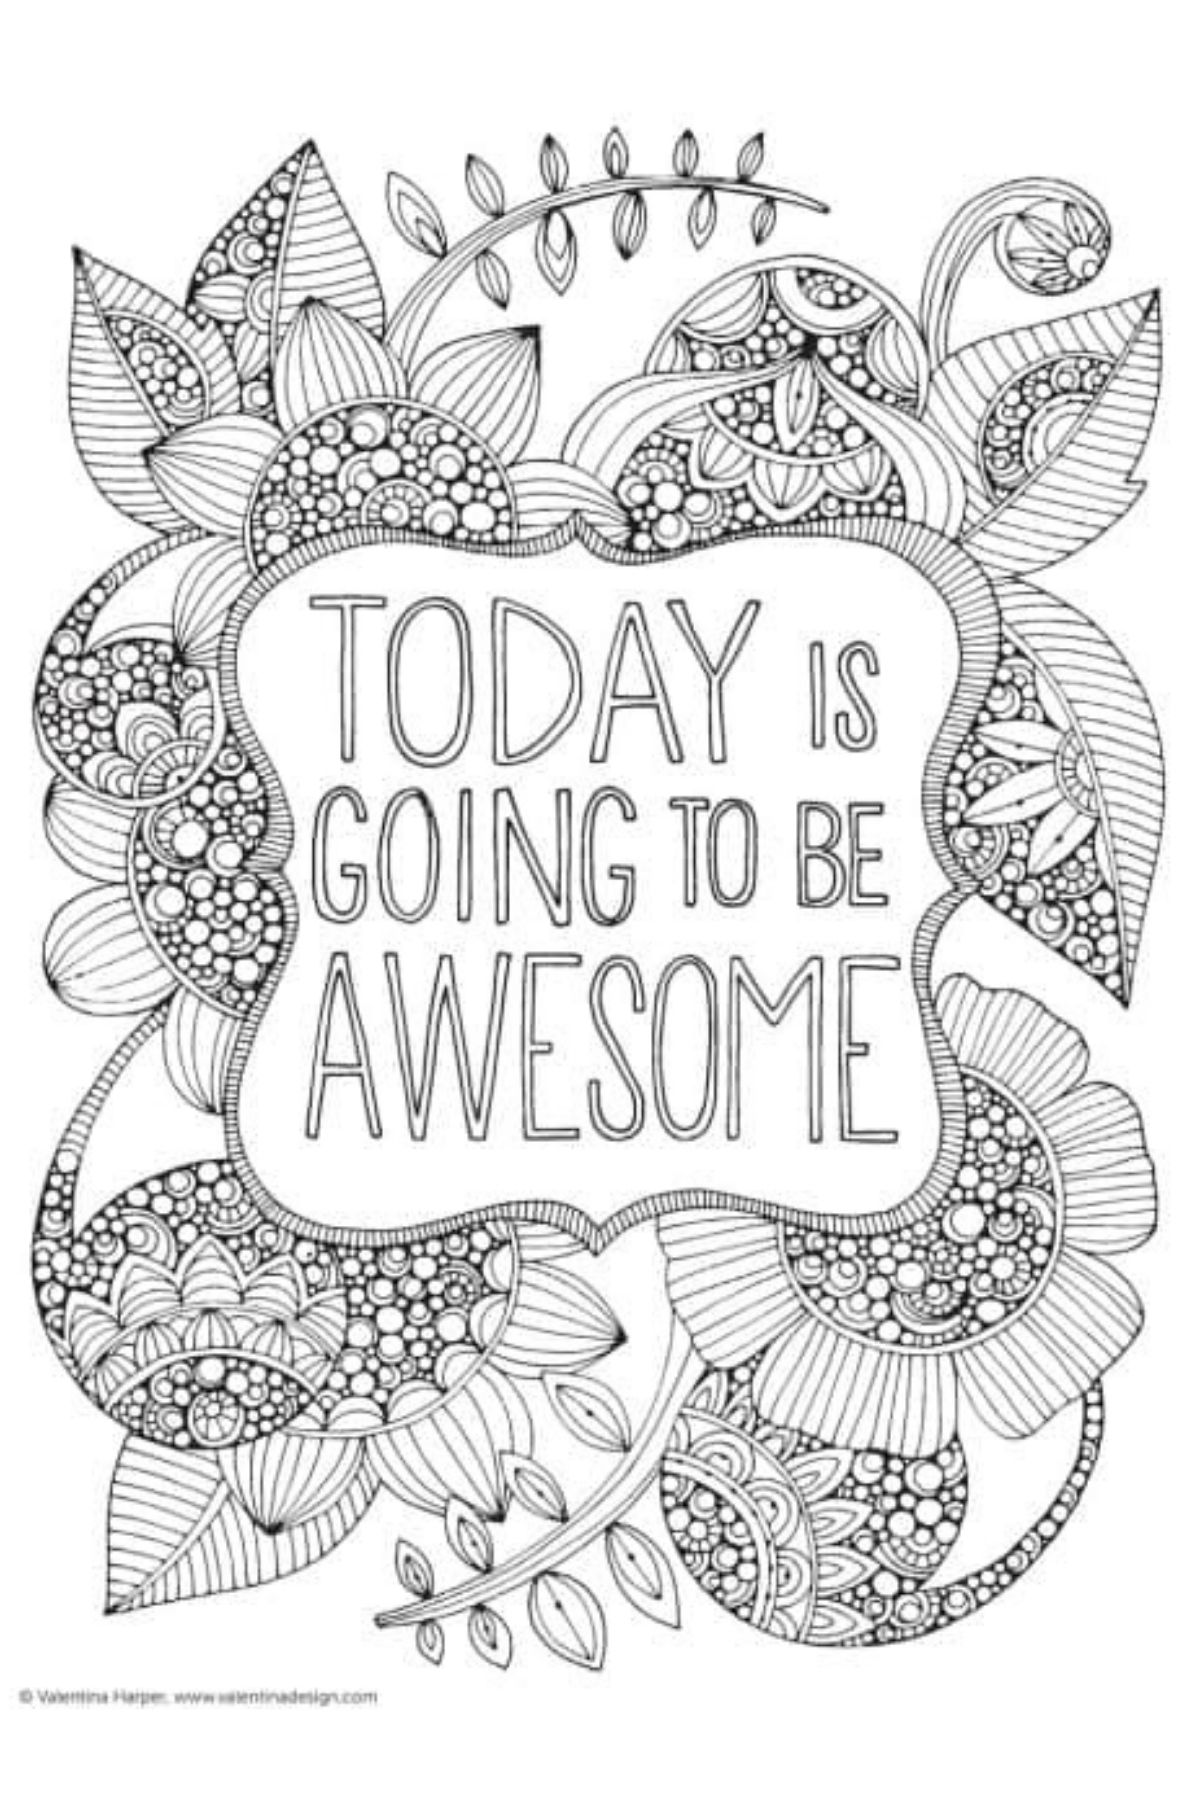 Positive affirmation printable coloring sheet that says today is going to be awesome.